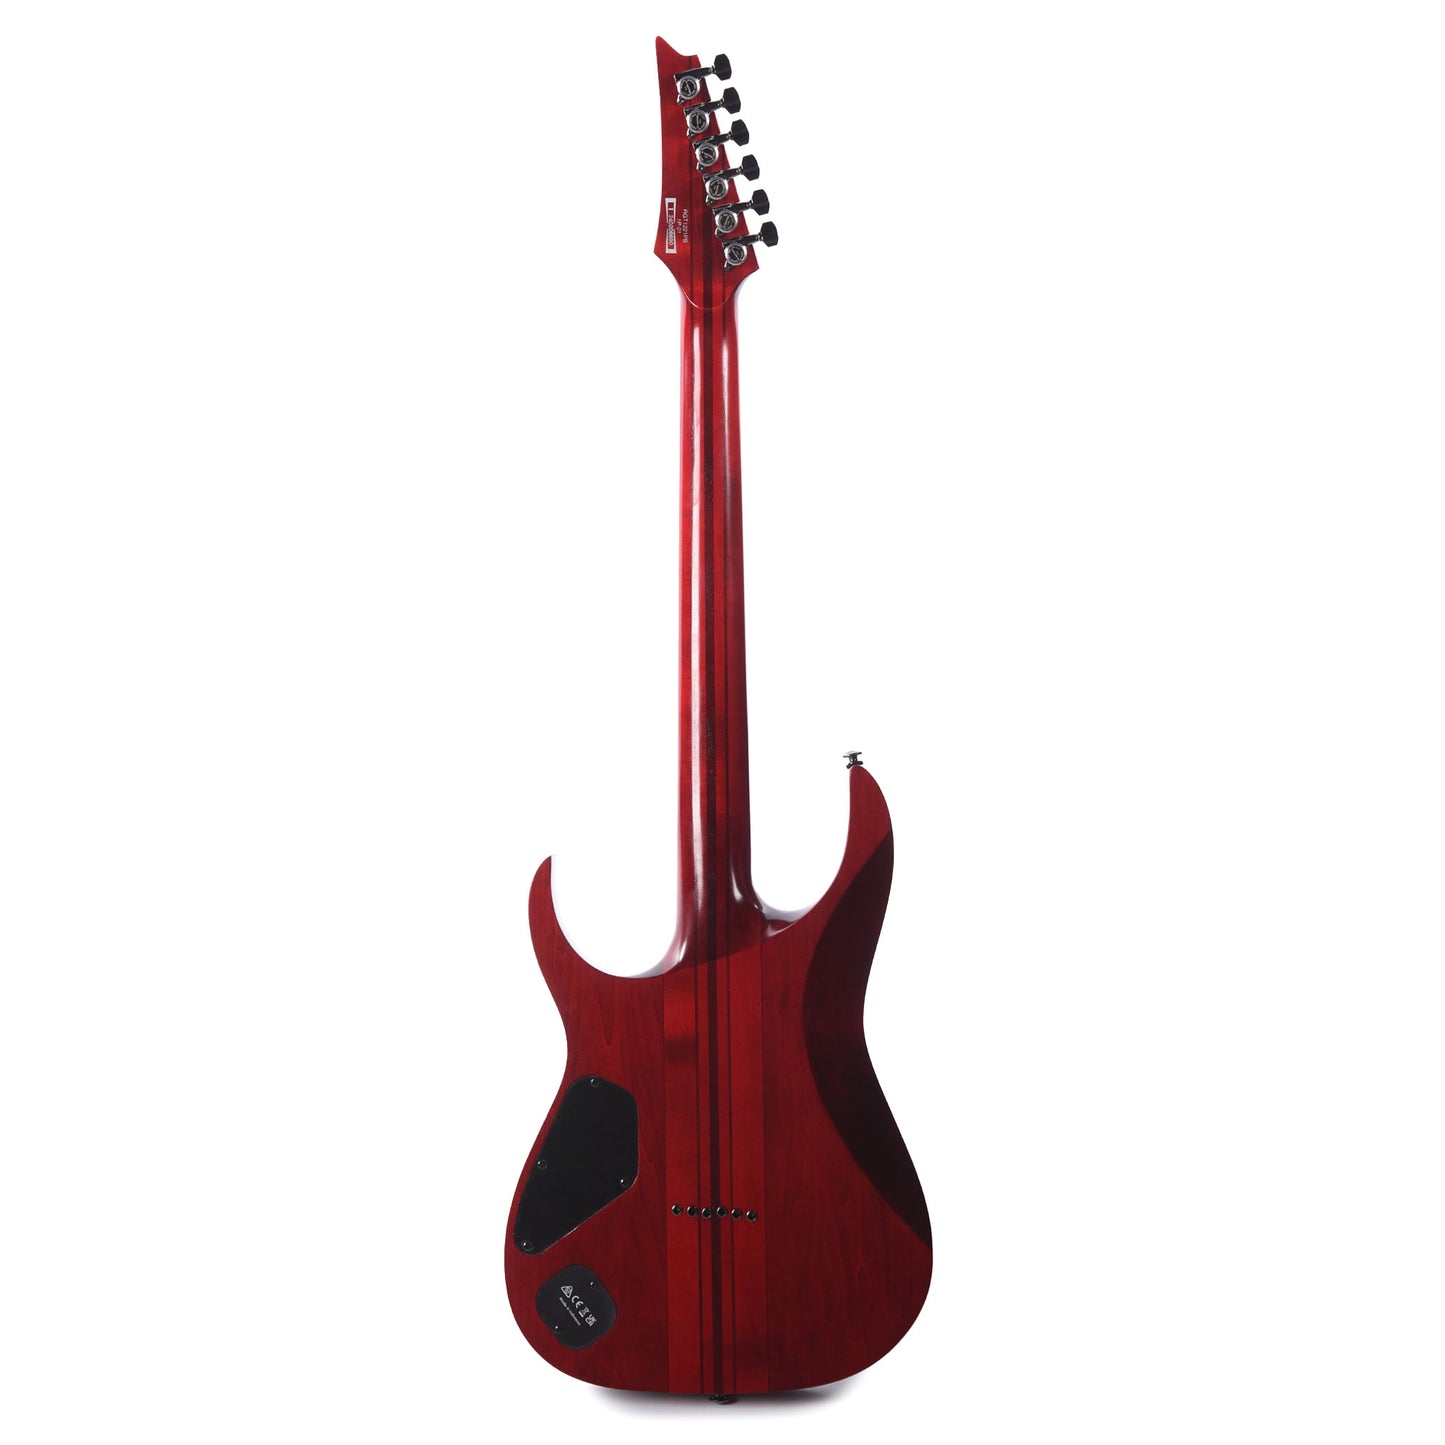 Ibanez RGT1221PBSWL Premium 6-String Electric Guitar Stained Wine Red Low Gloss